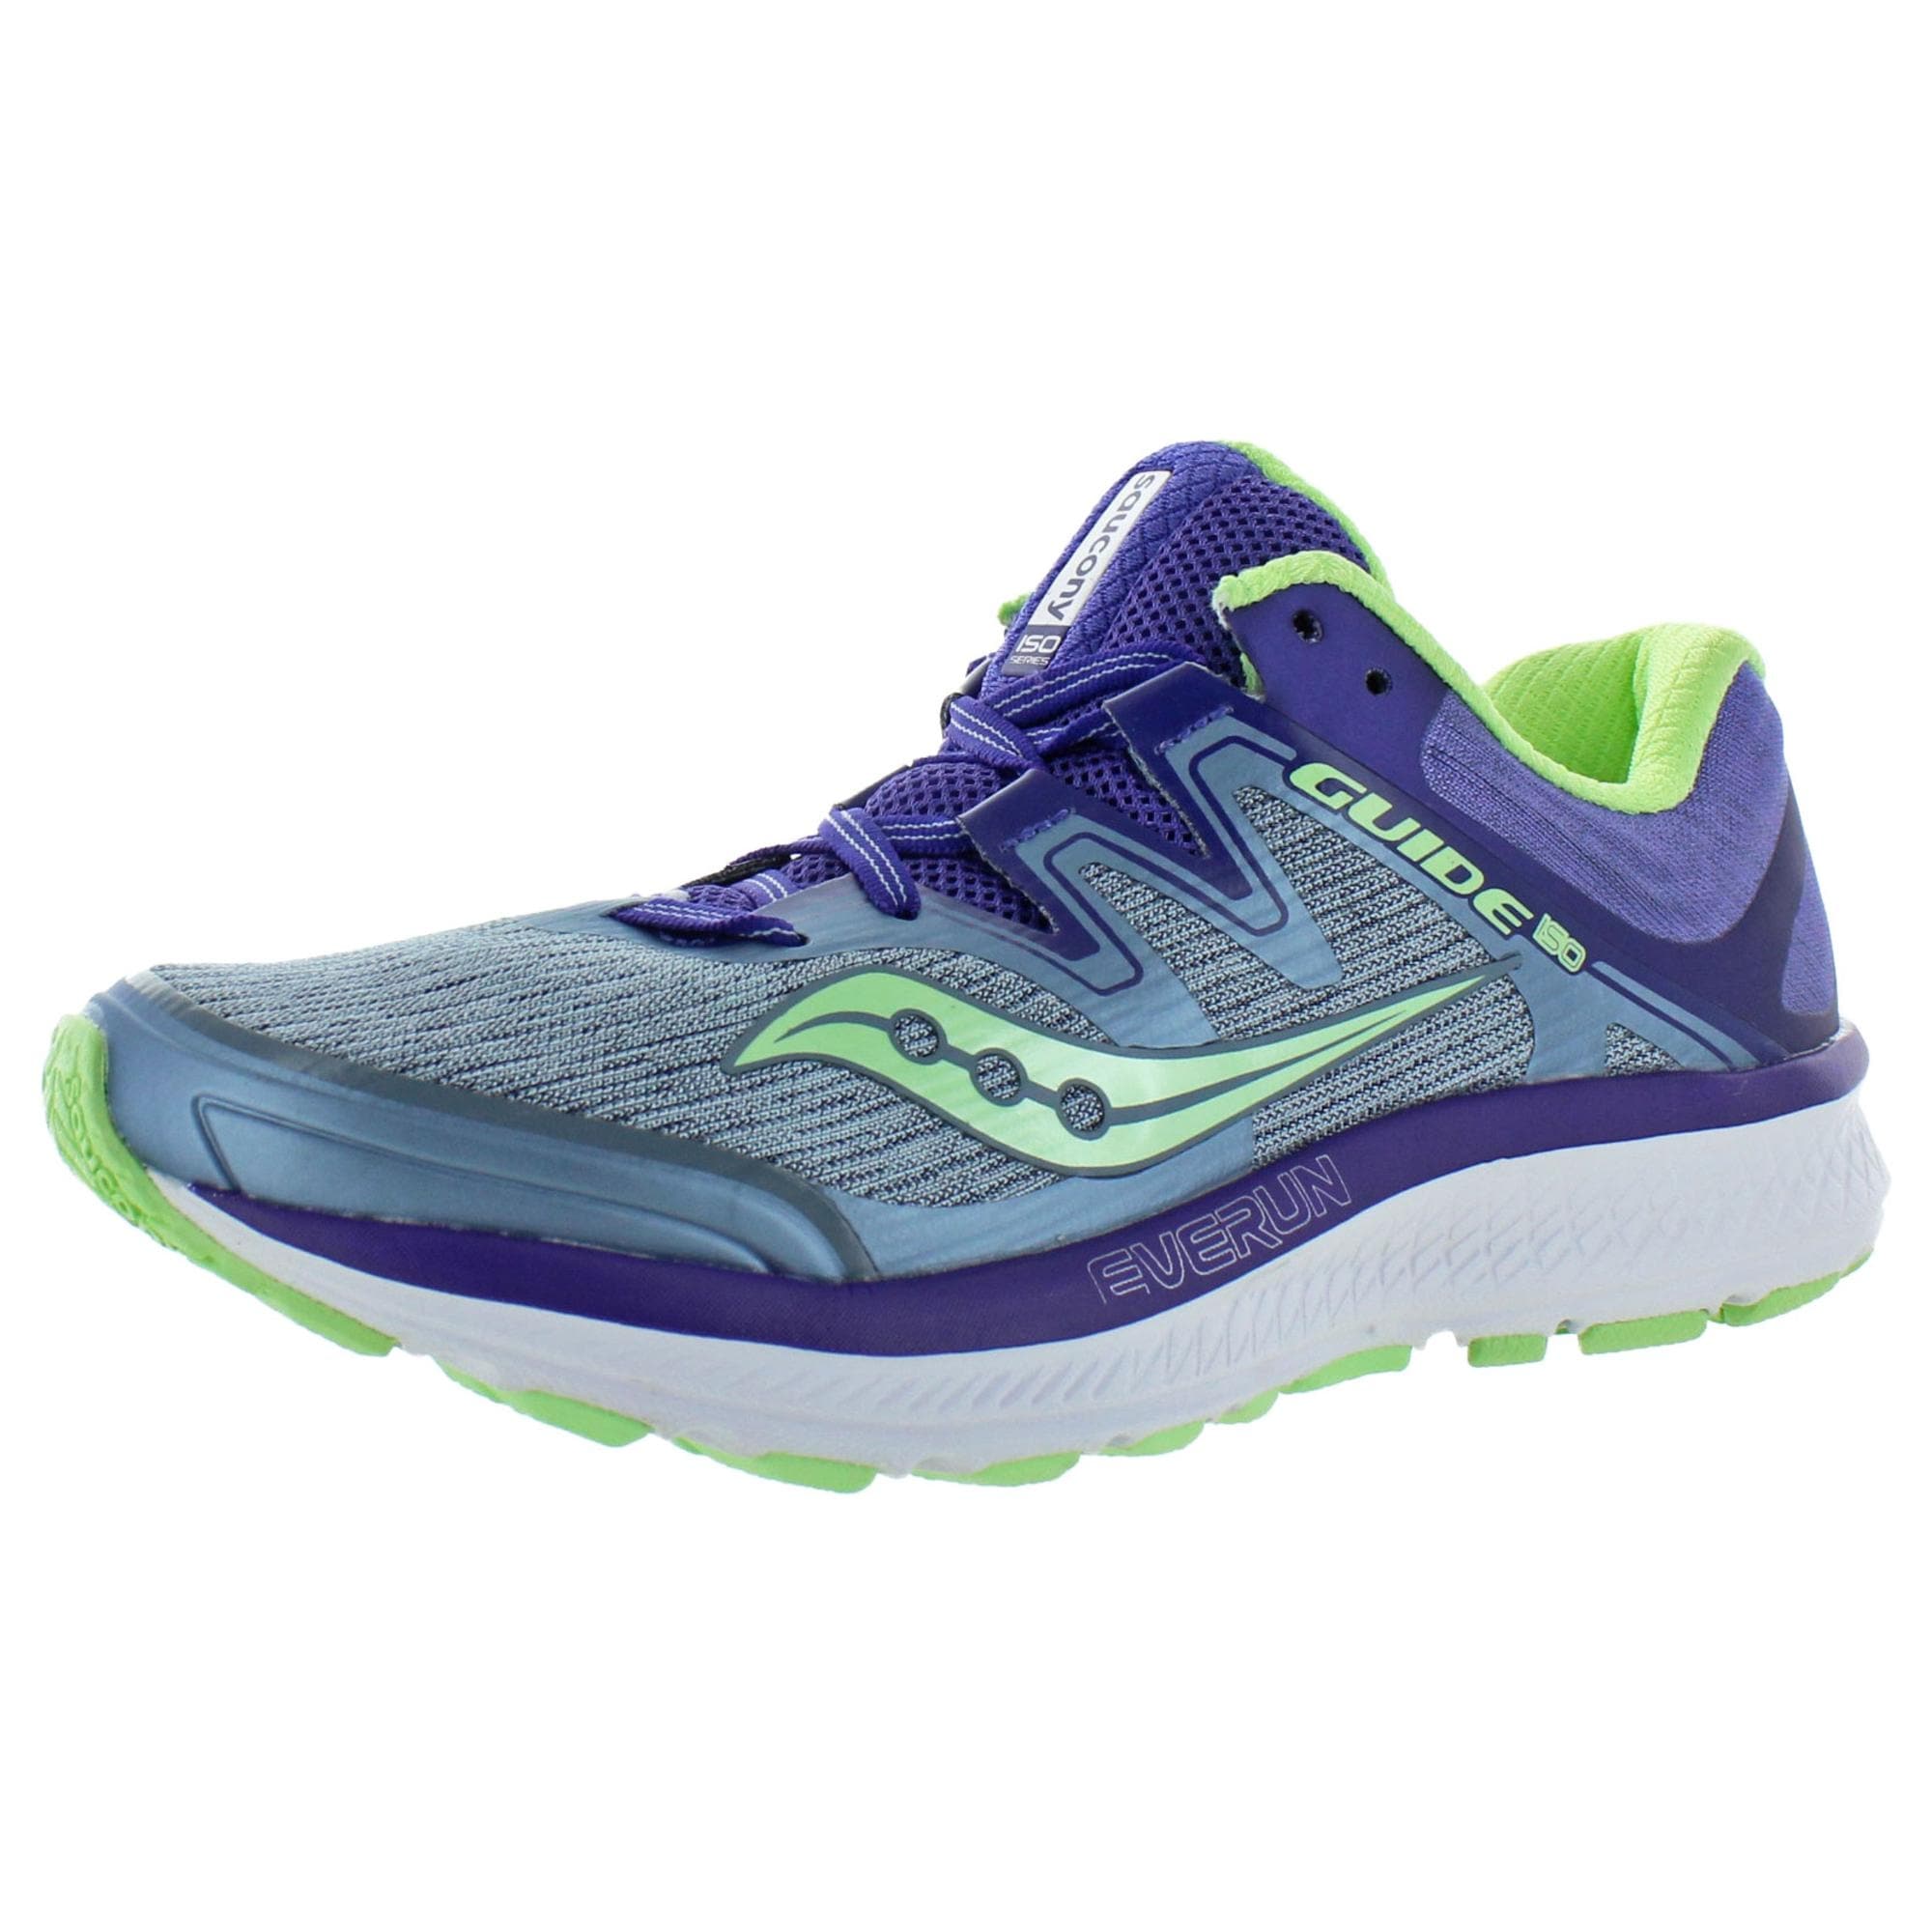 saucony women's guide iso running shoes